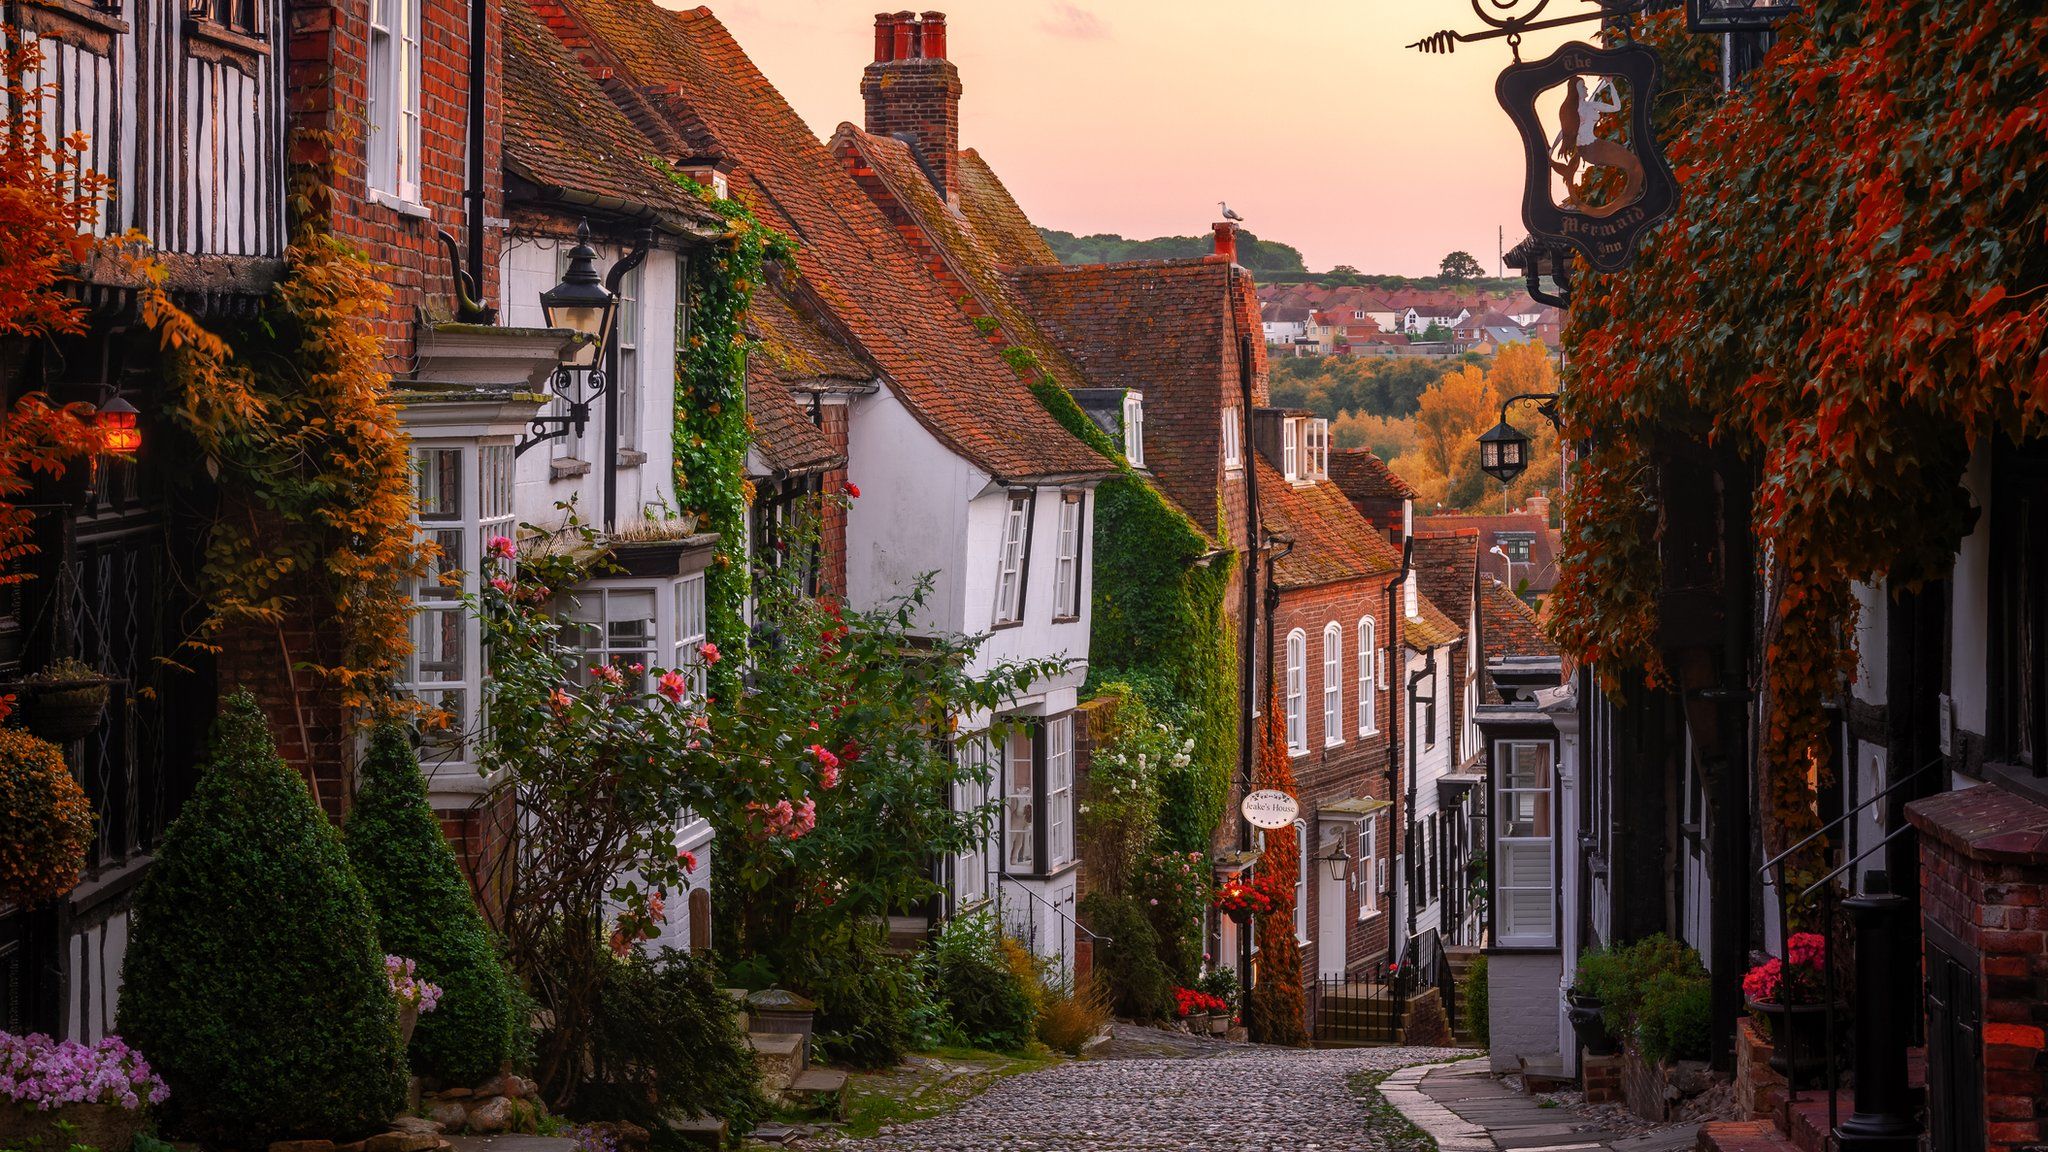 A row of houses in Rye, East Sussex